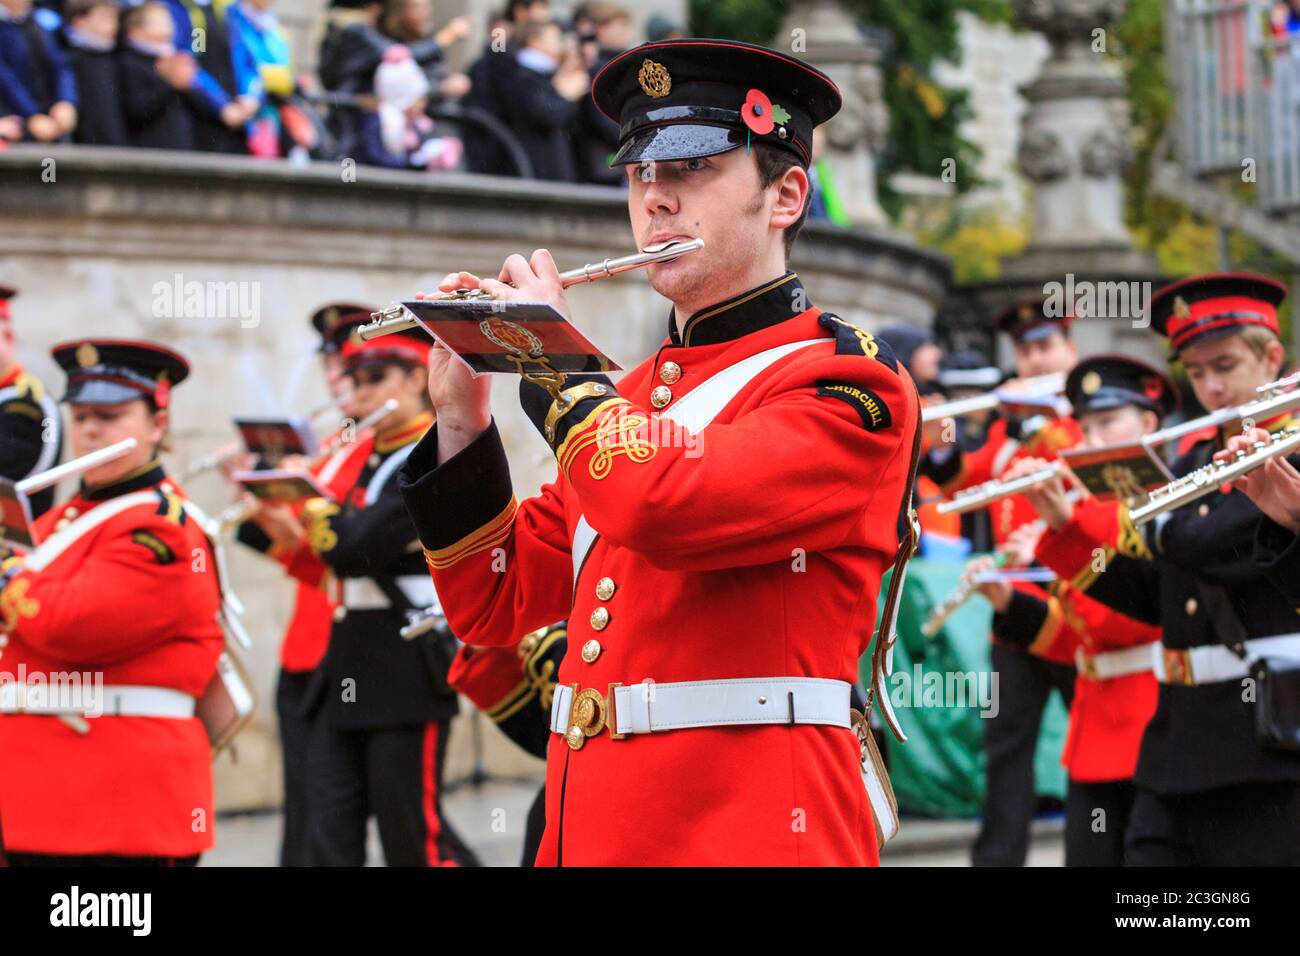 Flute player in red uniform from Ballywalter Flute Band at the Lord Mayor's Show, City of London, UK Stock Photo